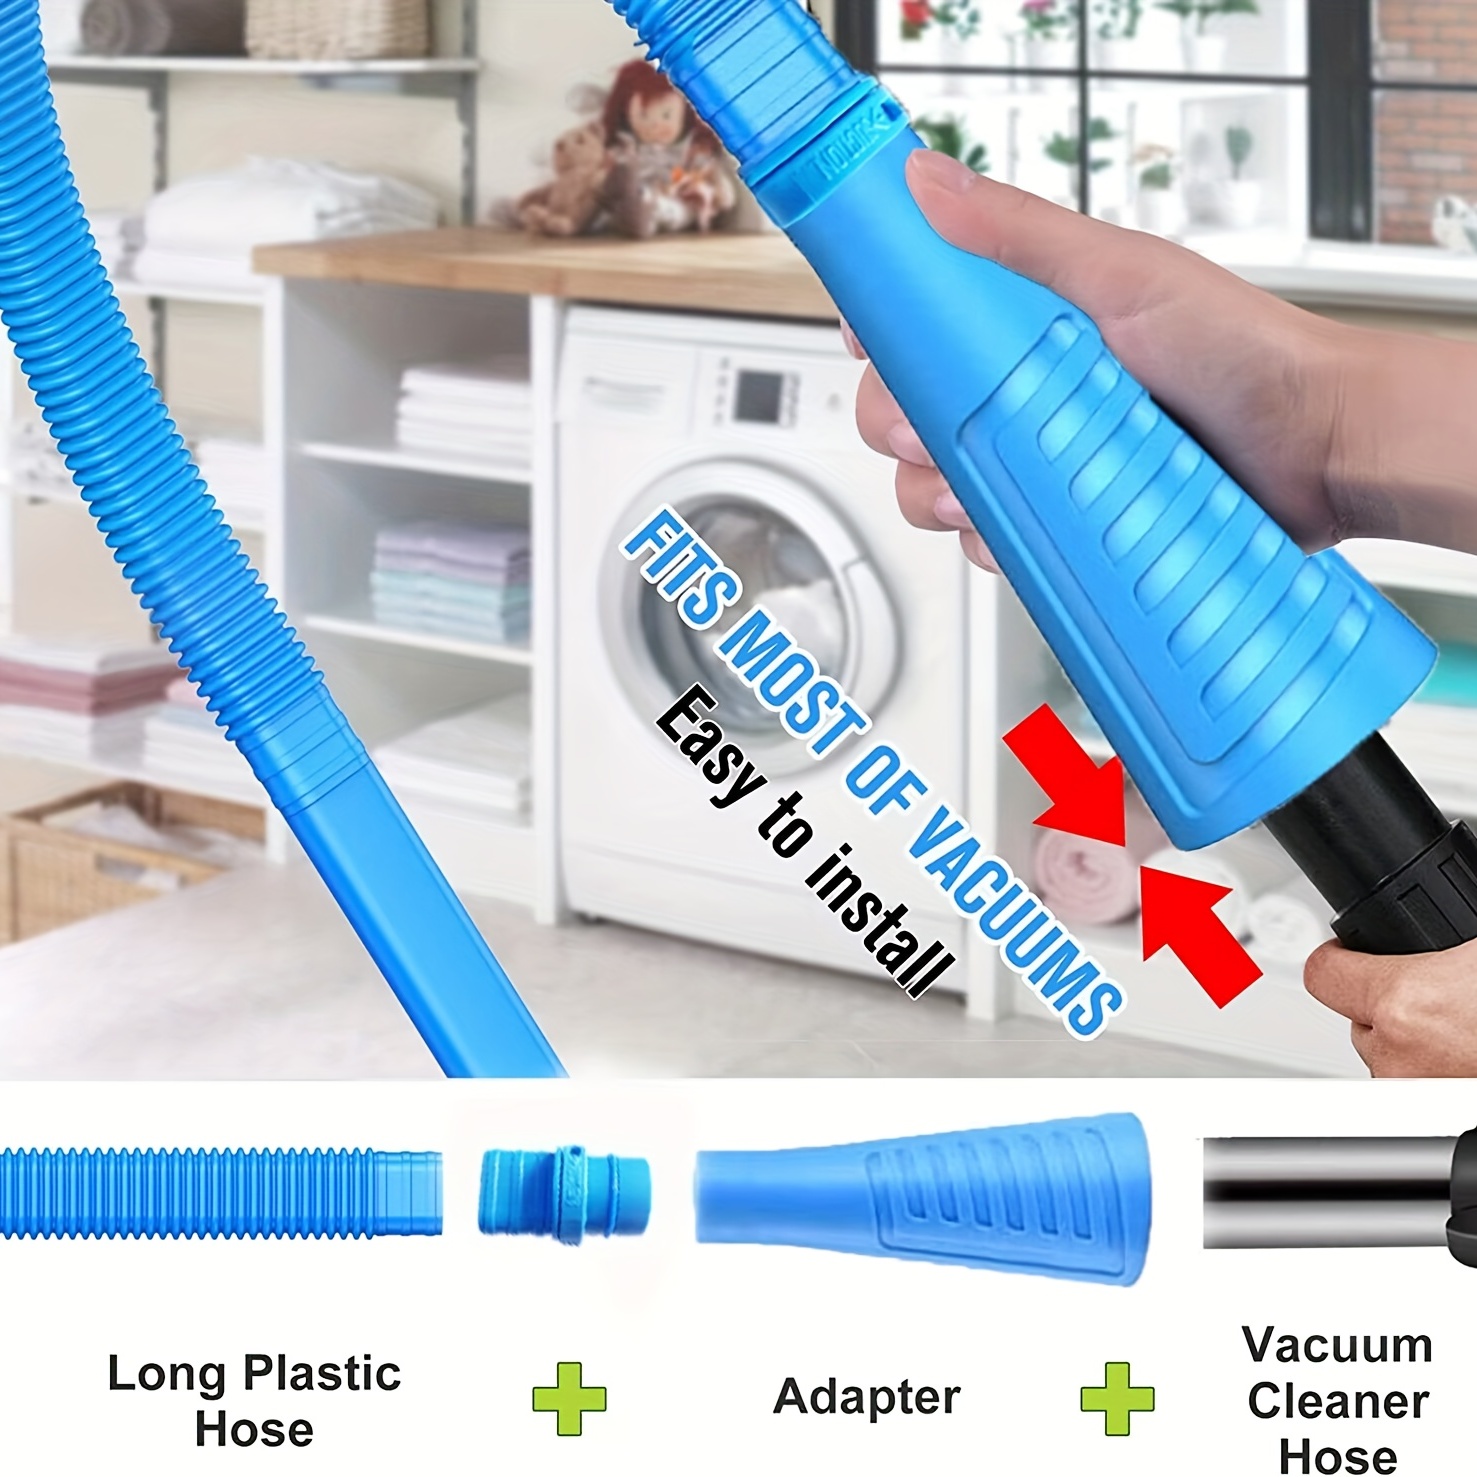 Sealegend 2 Pieces Dryer Vent Cleaner Kit Vacuum Attachment Hose with  Brush, Dryer Cleaning Brush Lint Remover Hose